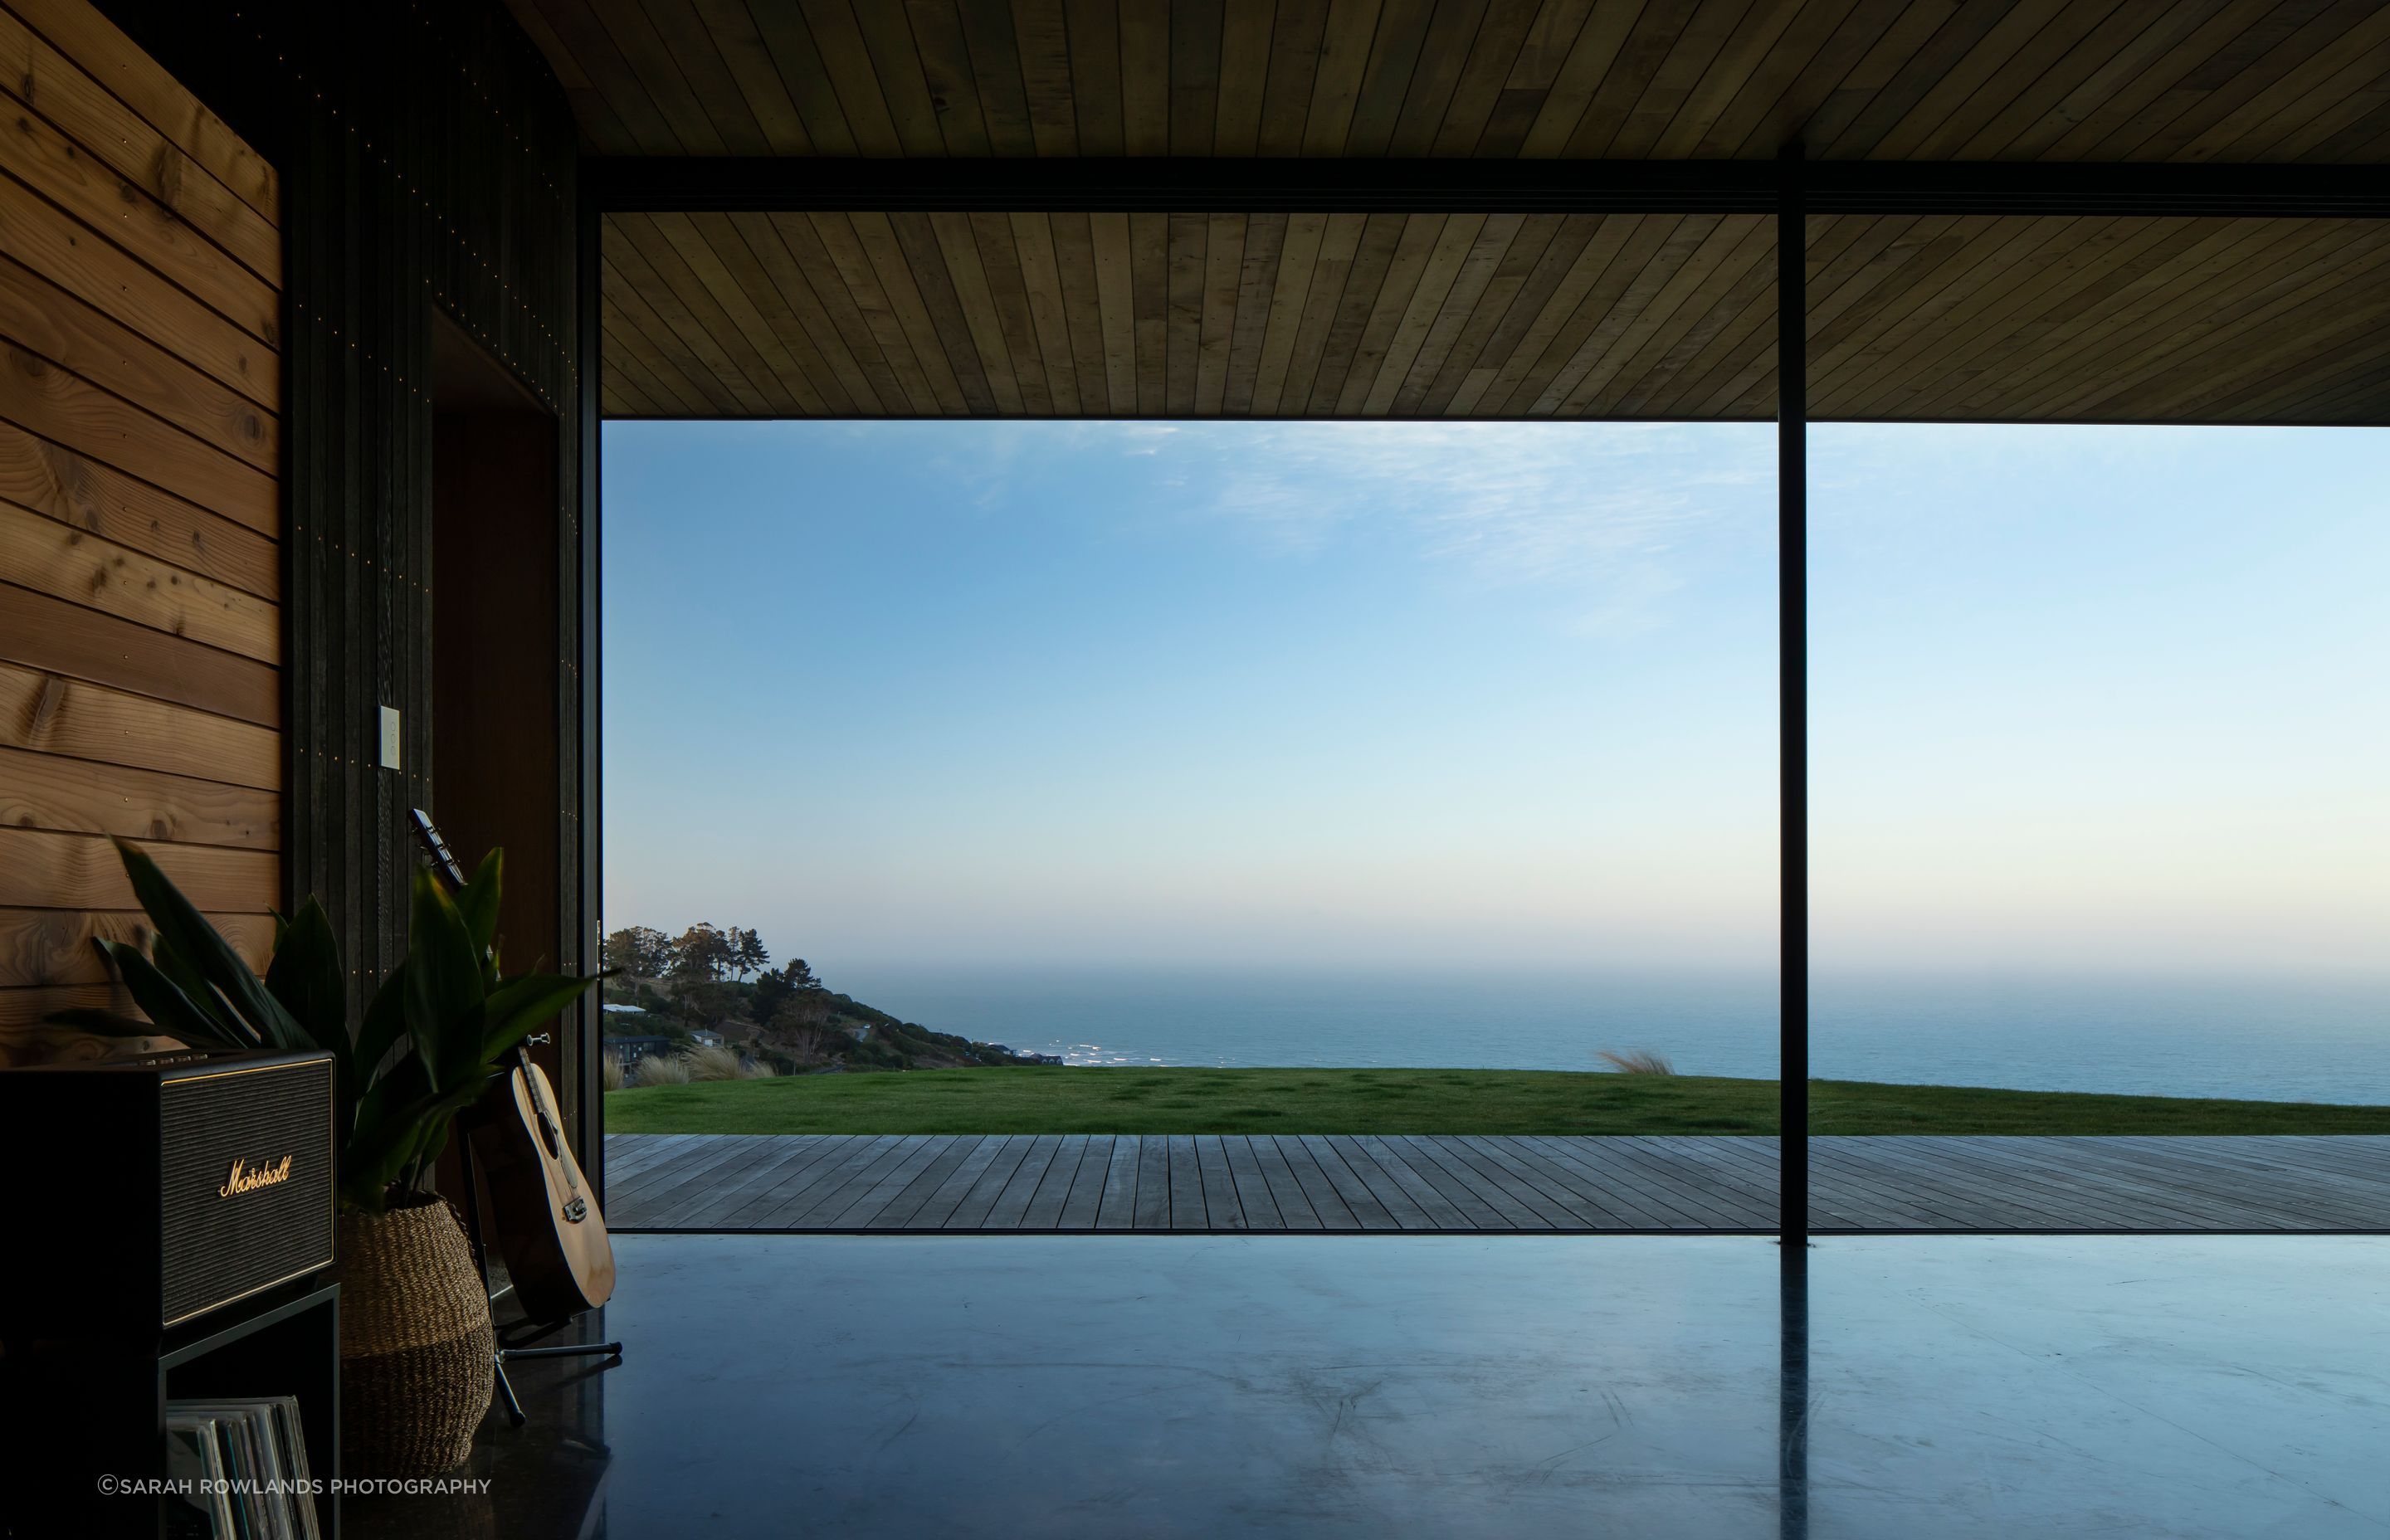 A view of the sea, captured from the interior of the glass living pavilion.